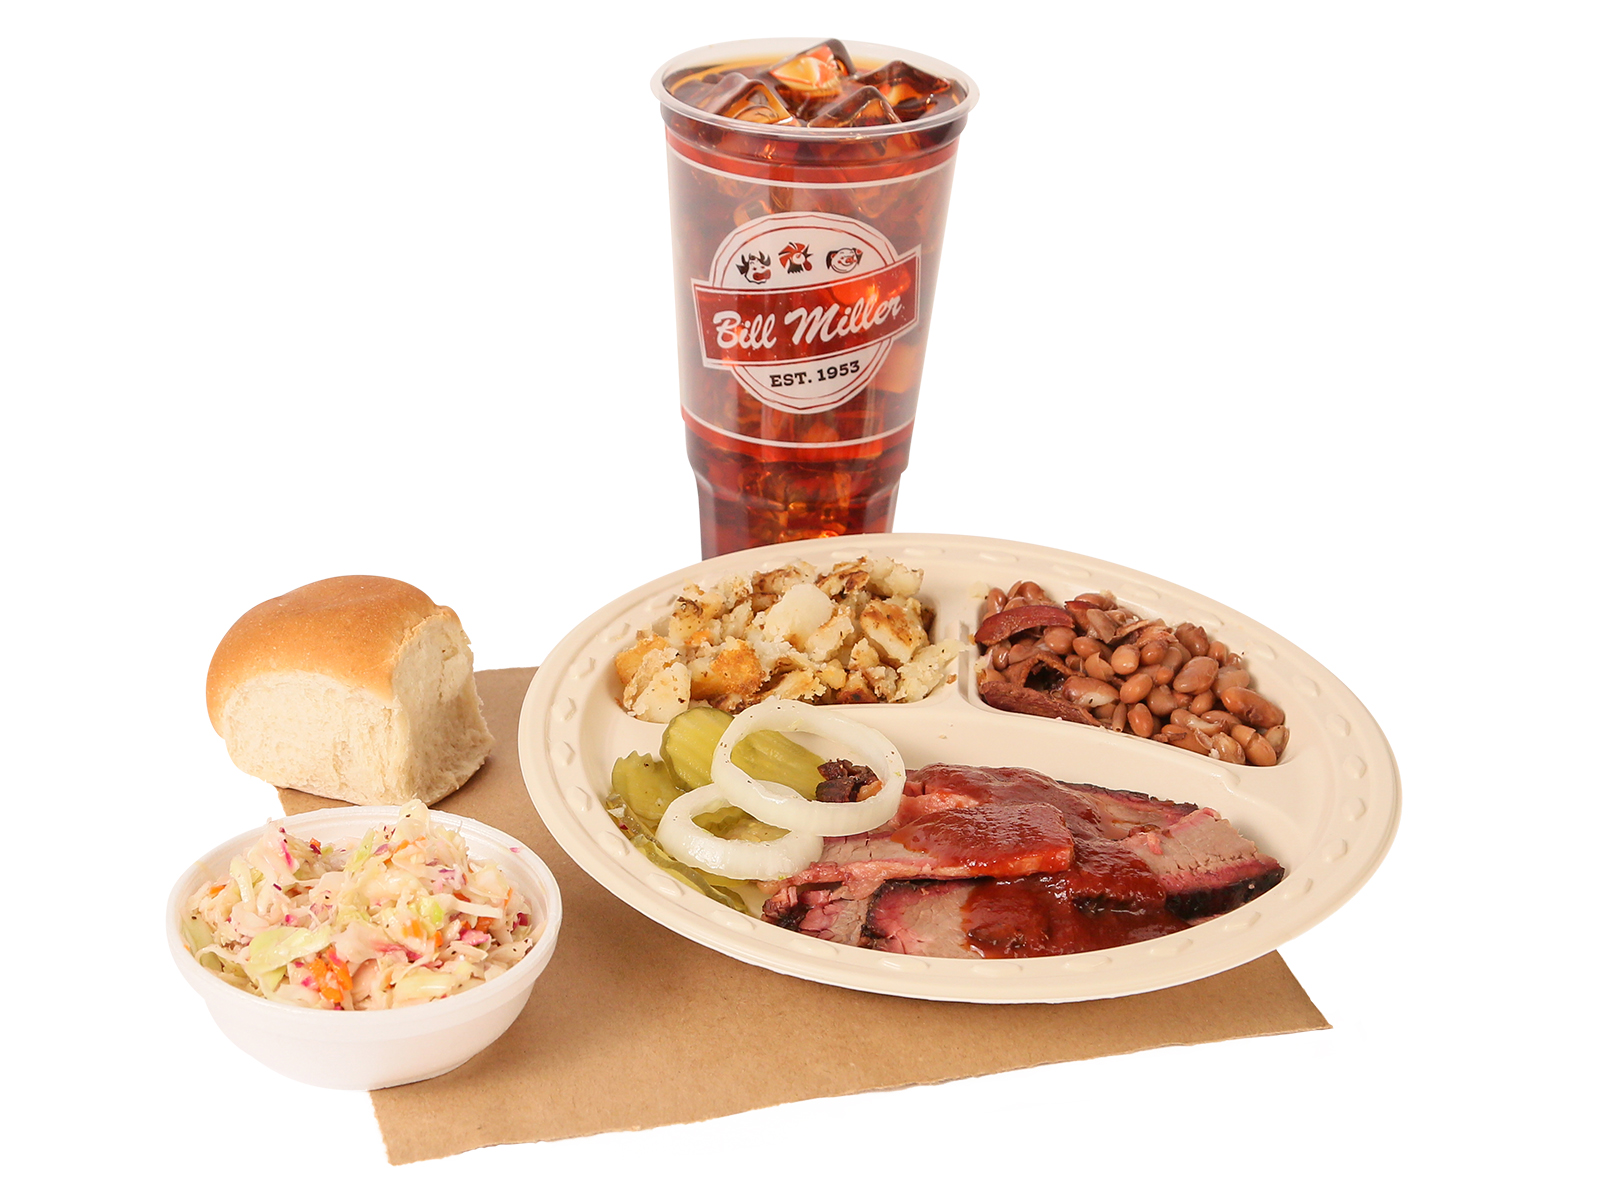 Regular plate served with brisket, pinto beans, hashbrowns, coleslaw, dinner roll, BBQ sauce, pickles, onions, & large tea